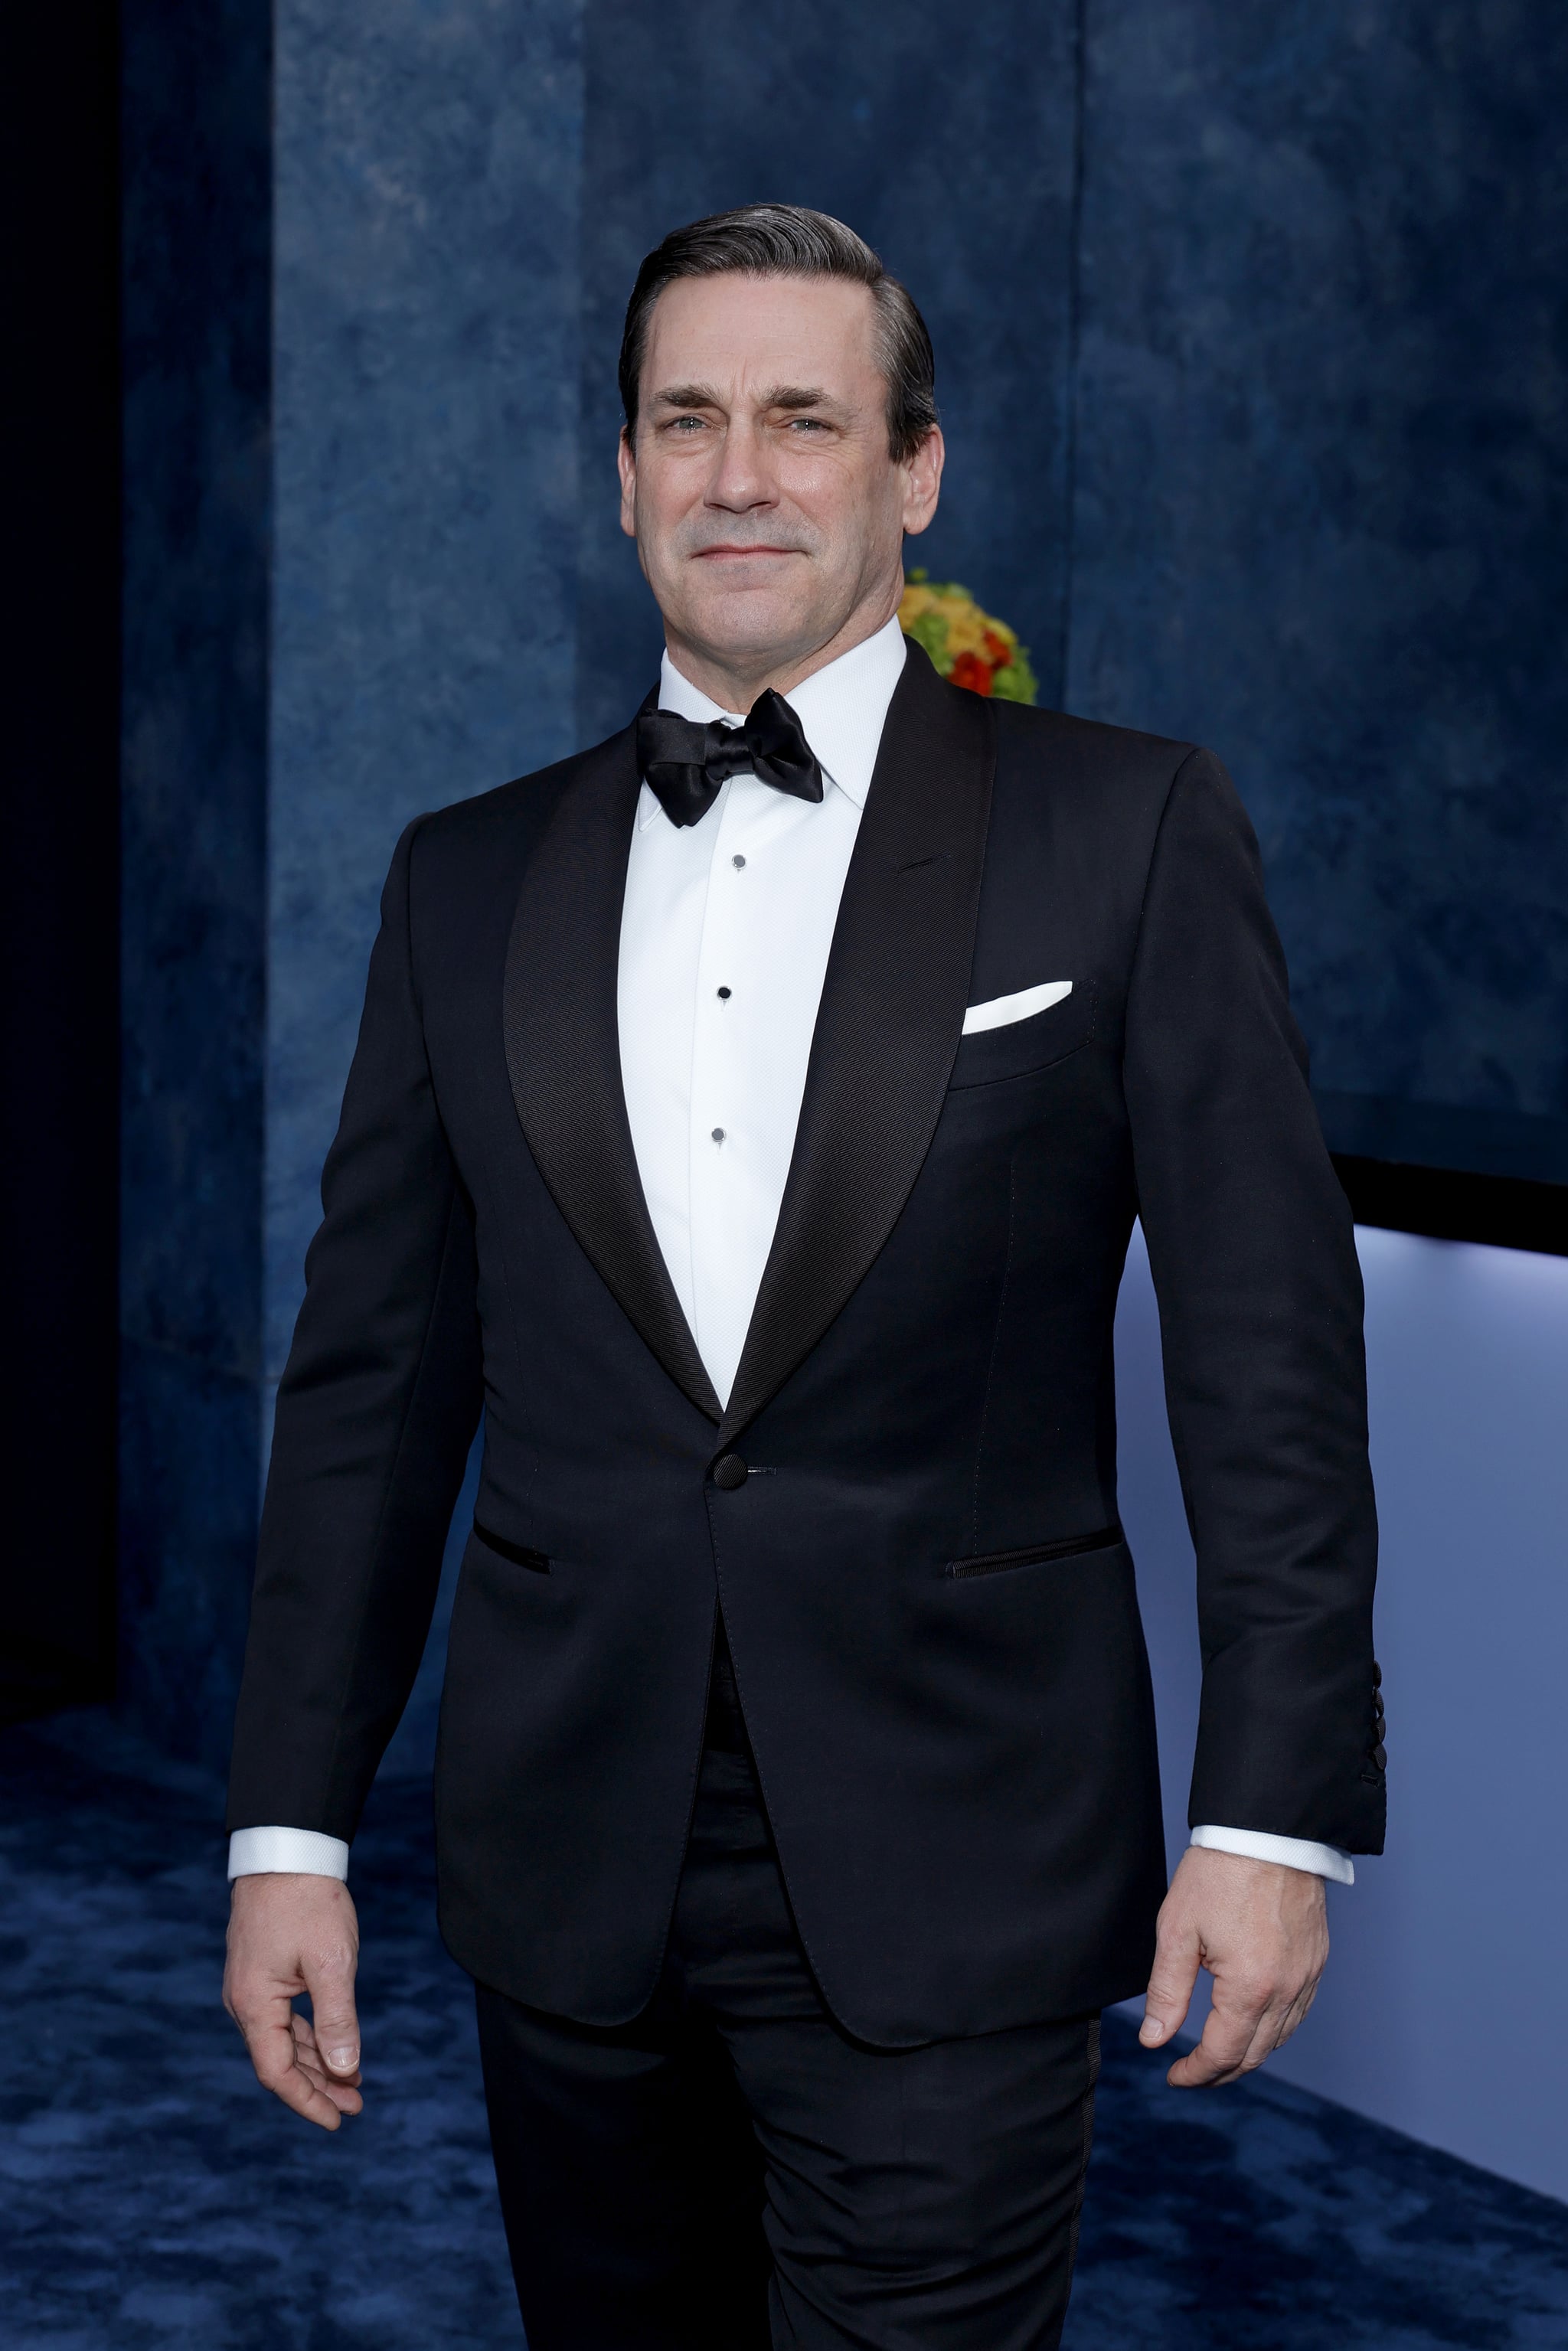 BEVERLY HILLS, CALIFORNIA - MARCH 12: EXCLUSIVE ACCESS, SPECIAL RATES APPLY. Jon Hamm attends the 2023 Vanity Fair Oscar Party Hosted By Radhika Jones at Wallis Annenberg Center for the Performing Arts on March 12, 2023 in Beverly Hills, California. (Photo by Stefanie Keenan/VF23/WireImage for Vanity Fair)